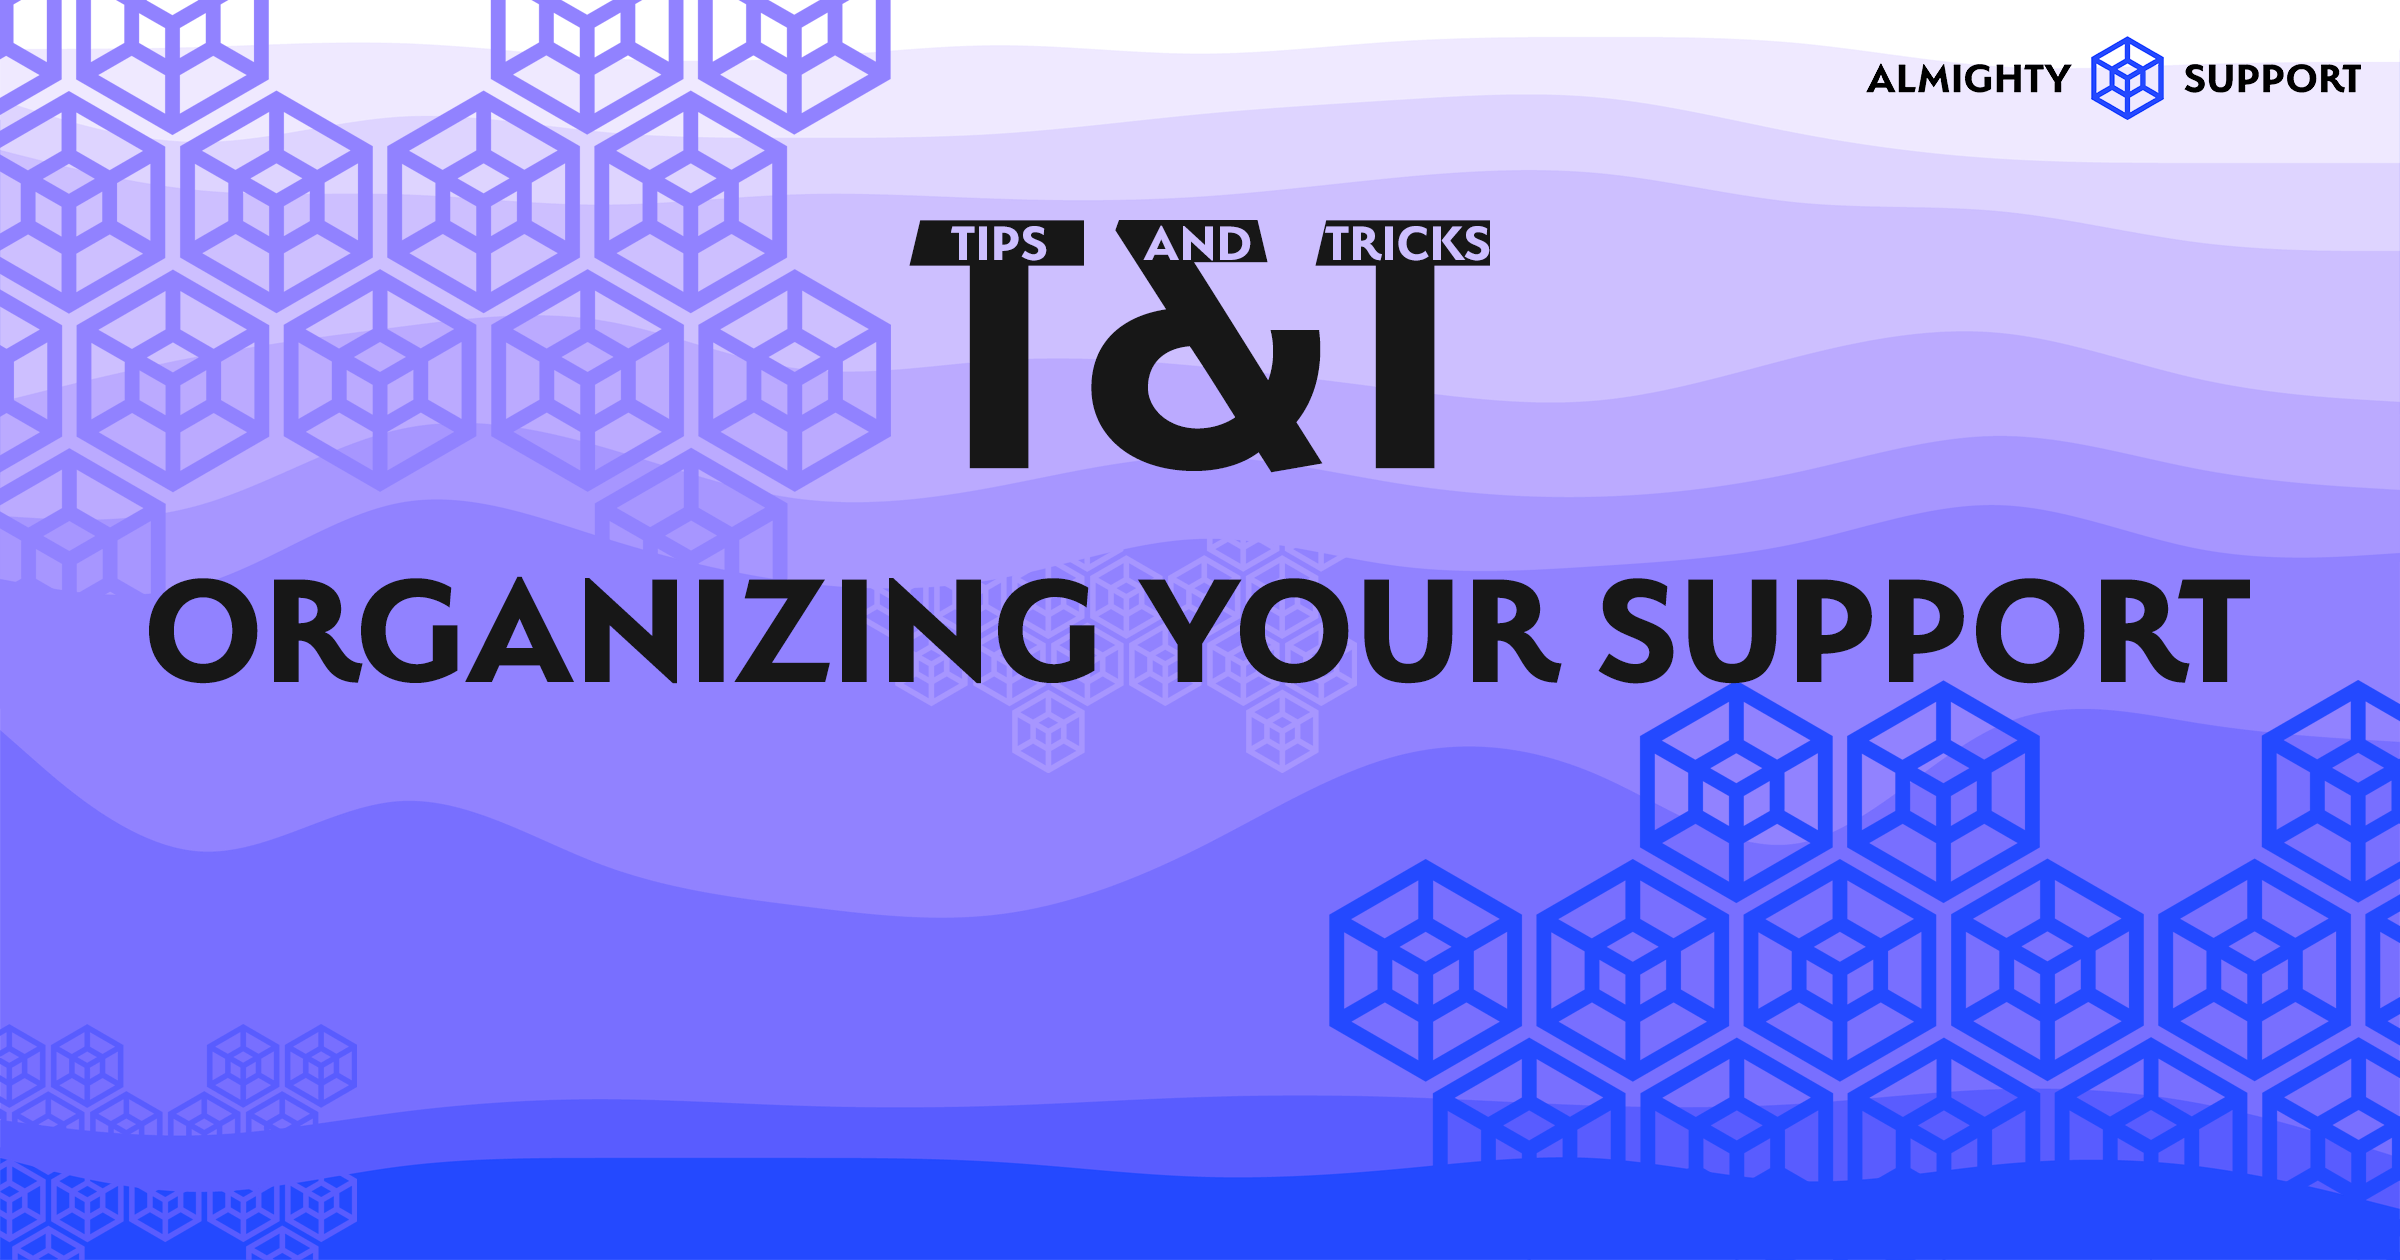 Tips & Tricks for Organizing Your Support